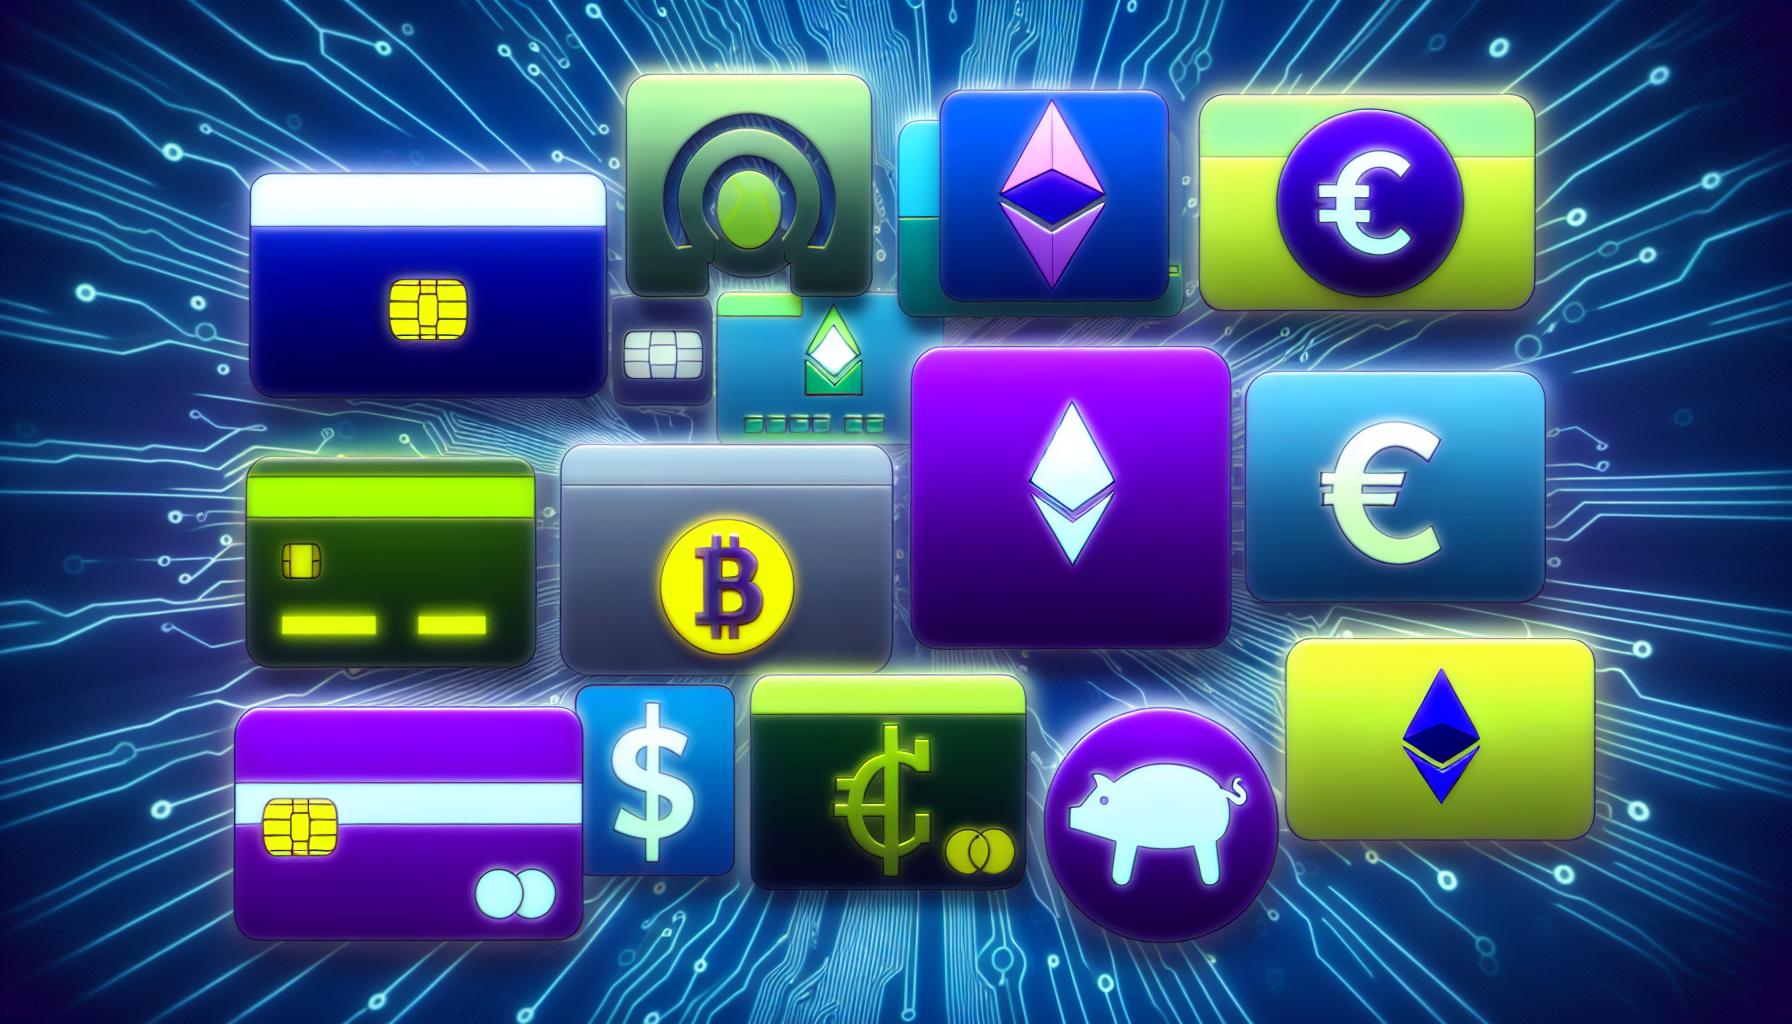 Photo of various payment options including credit/debit cards, cryptocurrencies, and e-wallets for online casino transactions